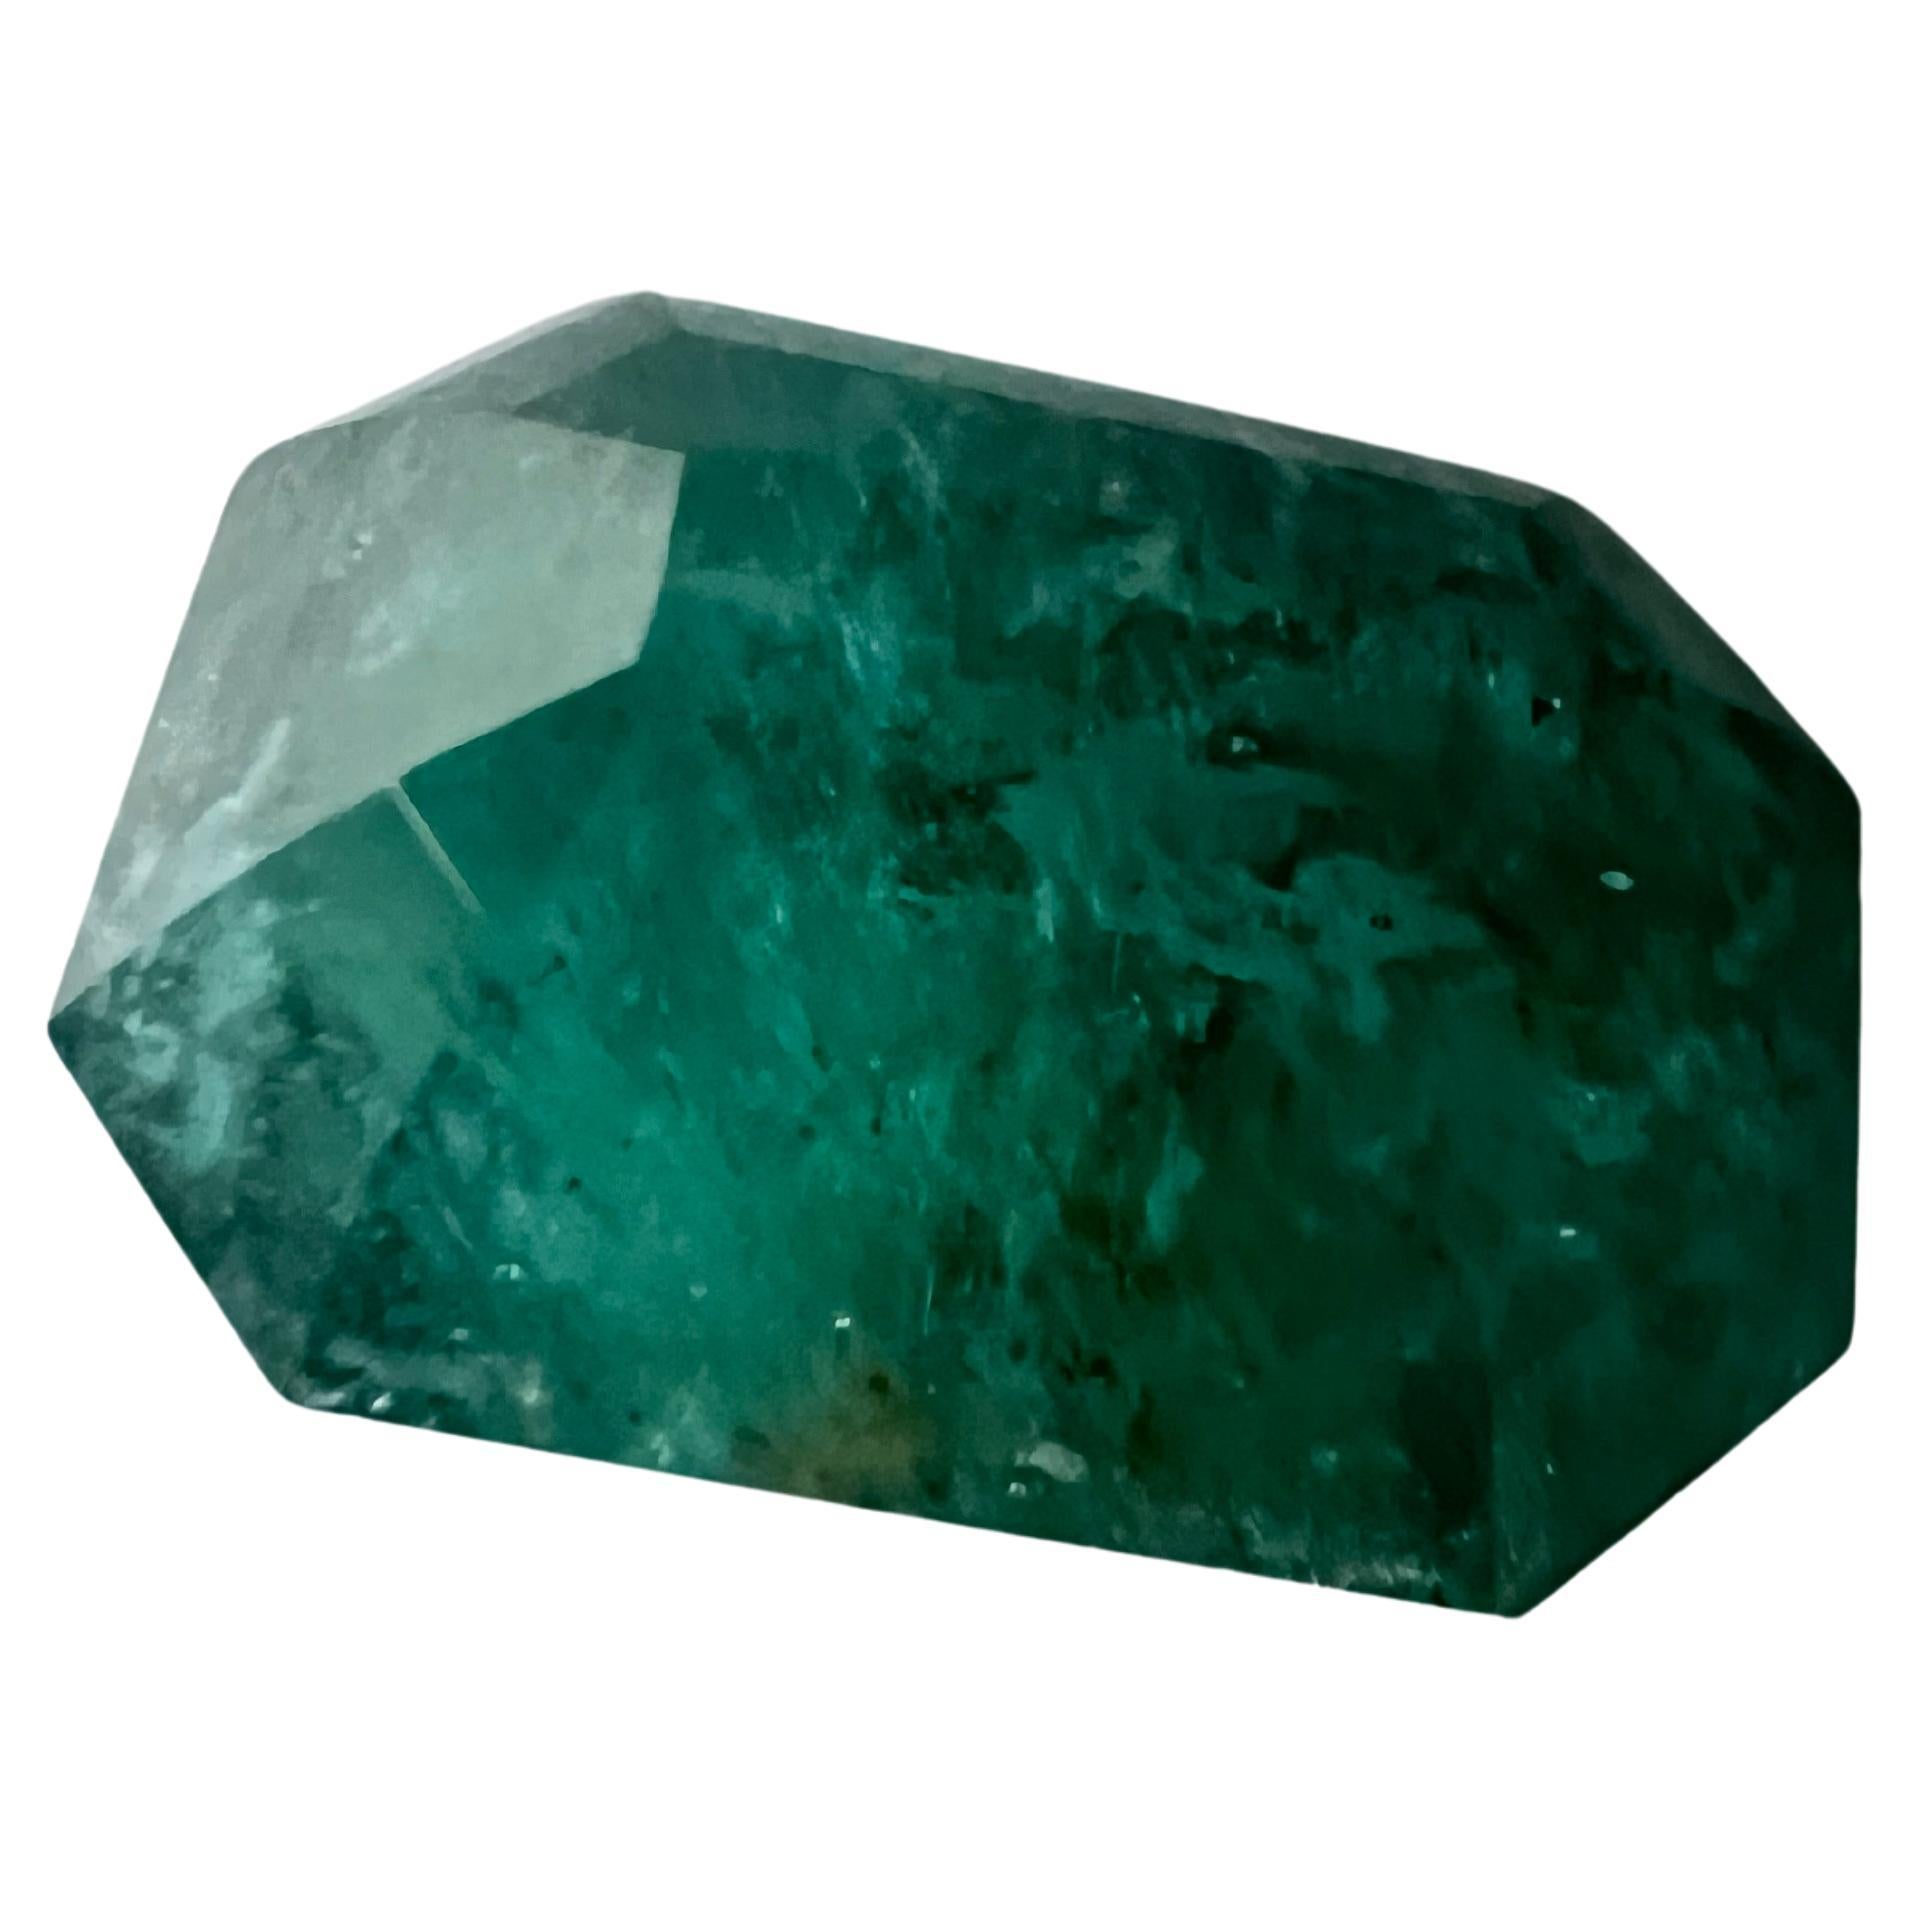 Our exquisite 11.2 carat Natural Non-Oil Emerald Cut Emerald Gemstone – a true embodiment of timeless beauty and sophistication. This stunning gemstone is carefully crafted to showcase the classic elegance of an emerald cut, allowing its natural